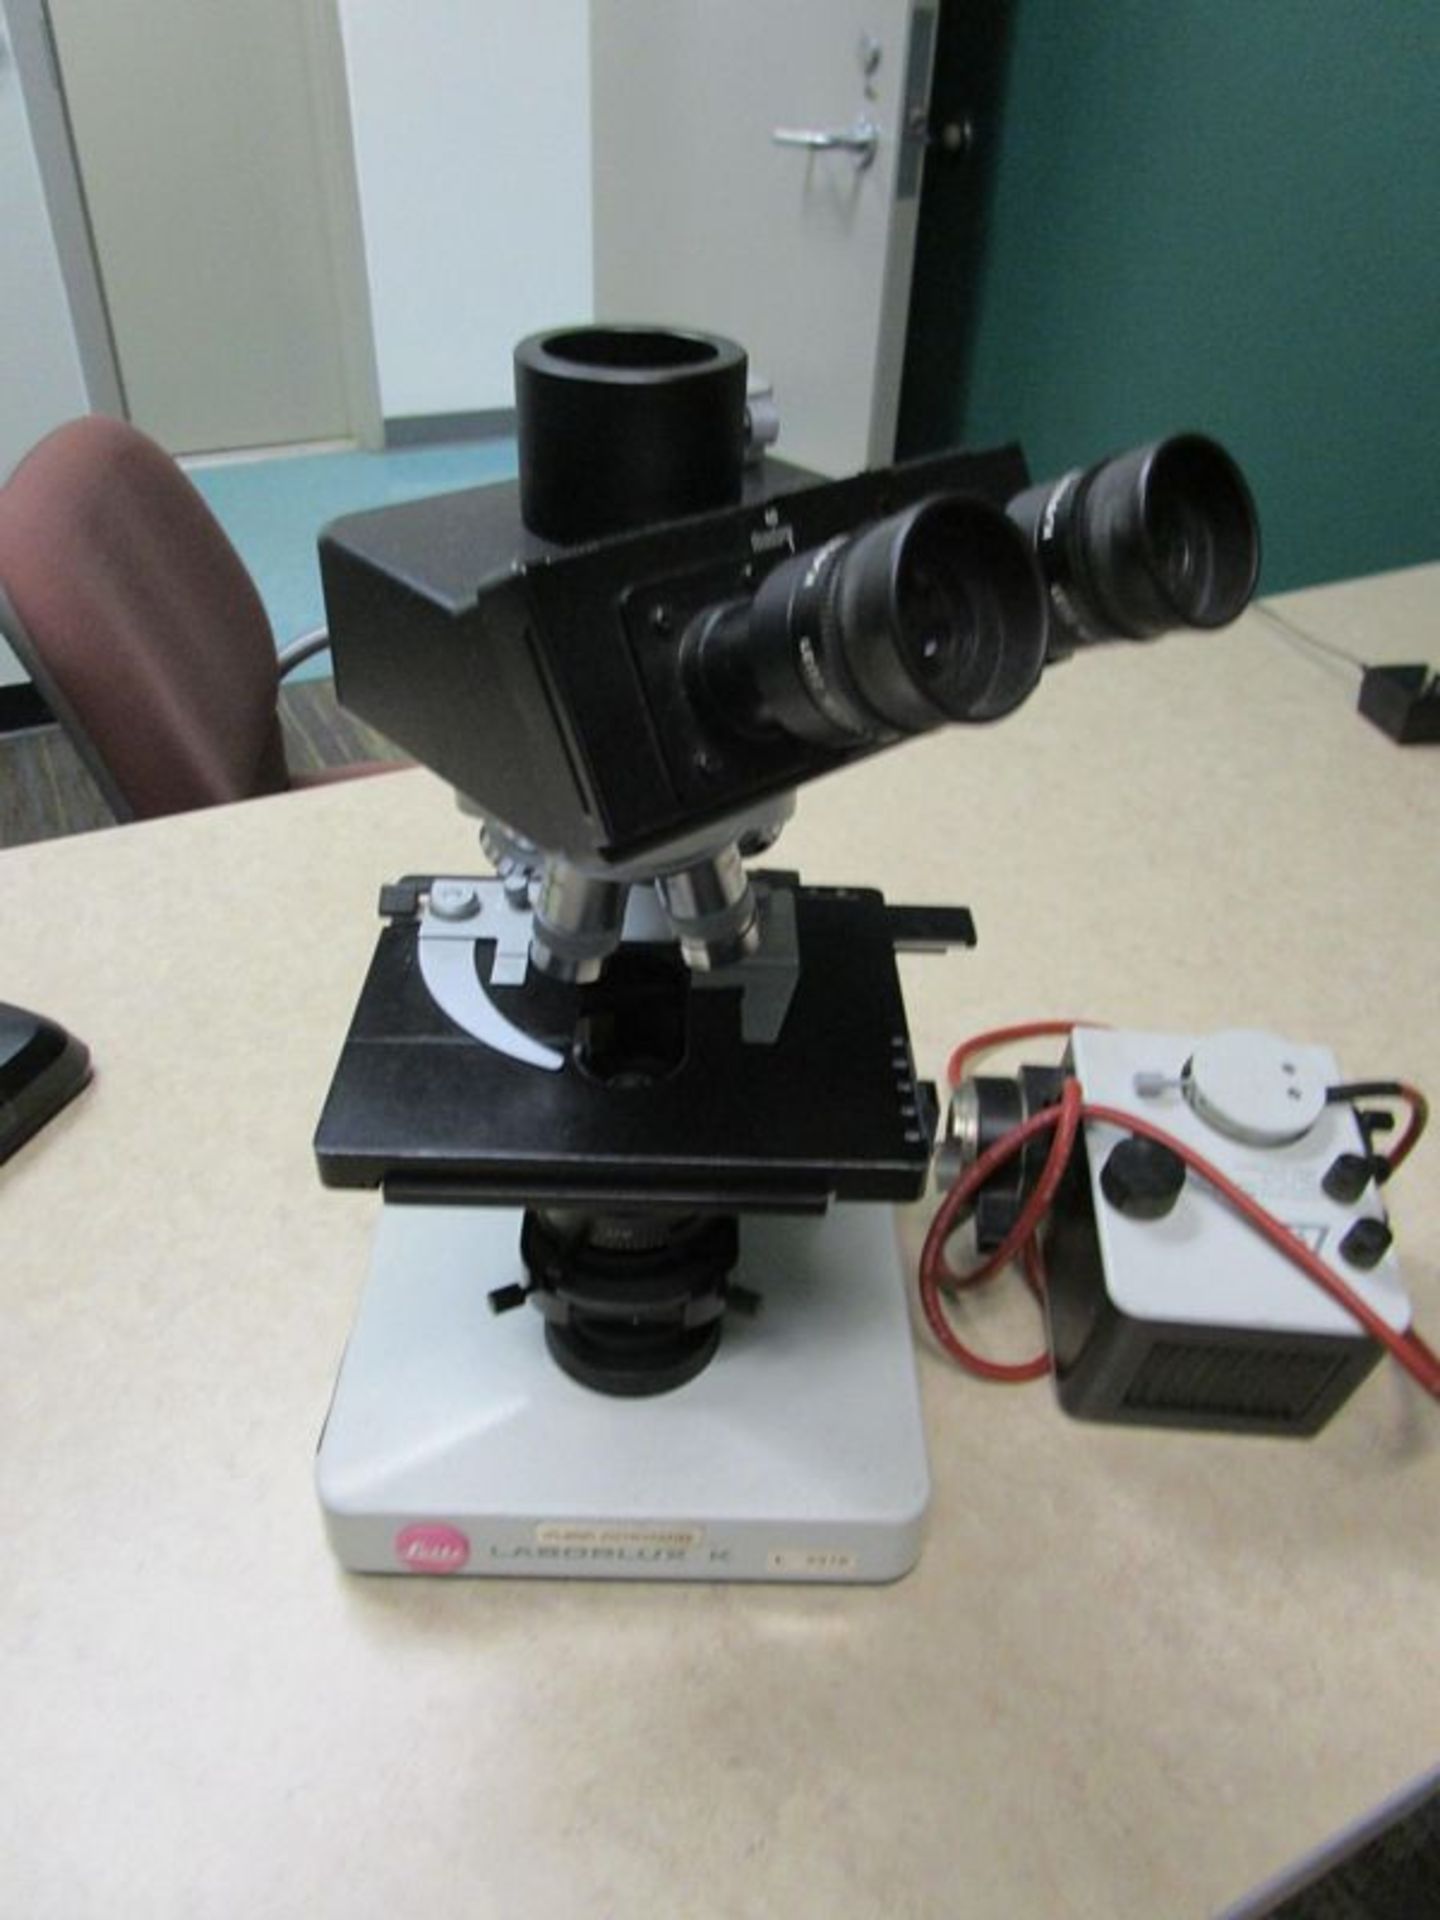 Leitz Model Laborlux K  Microscope , , with X, Y Translation Stage with Clip, 10x Magnification